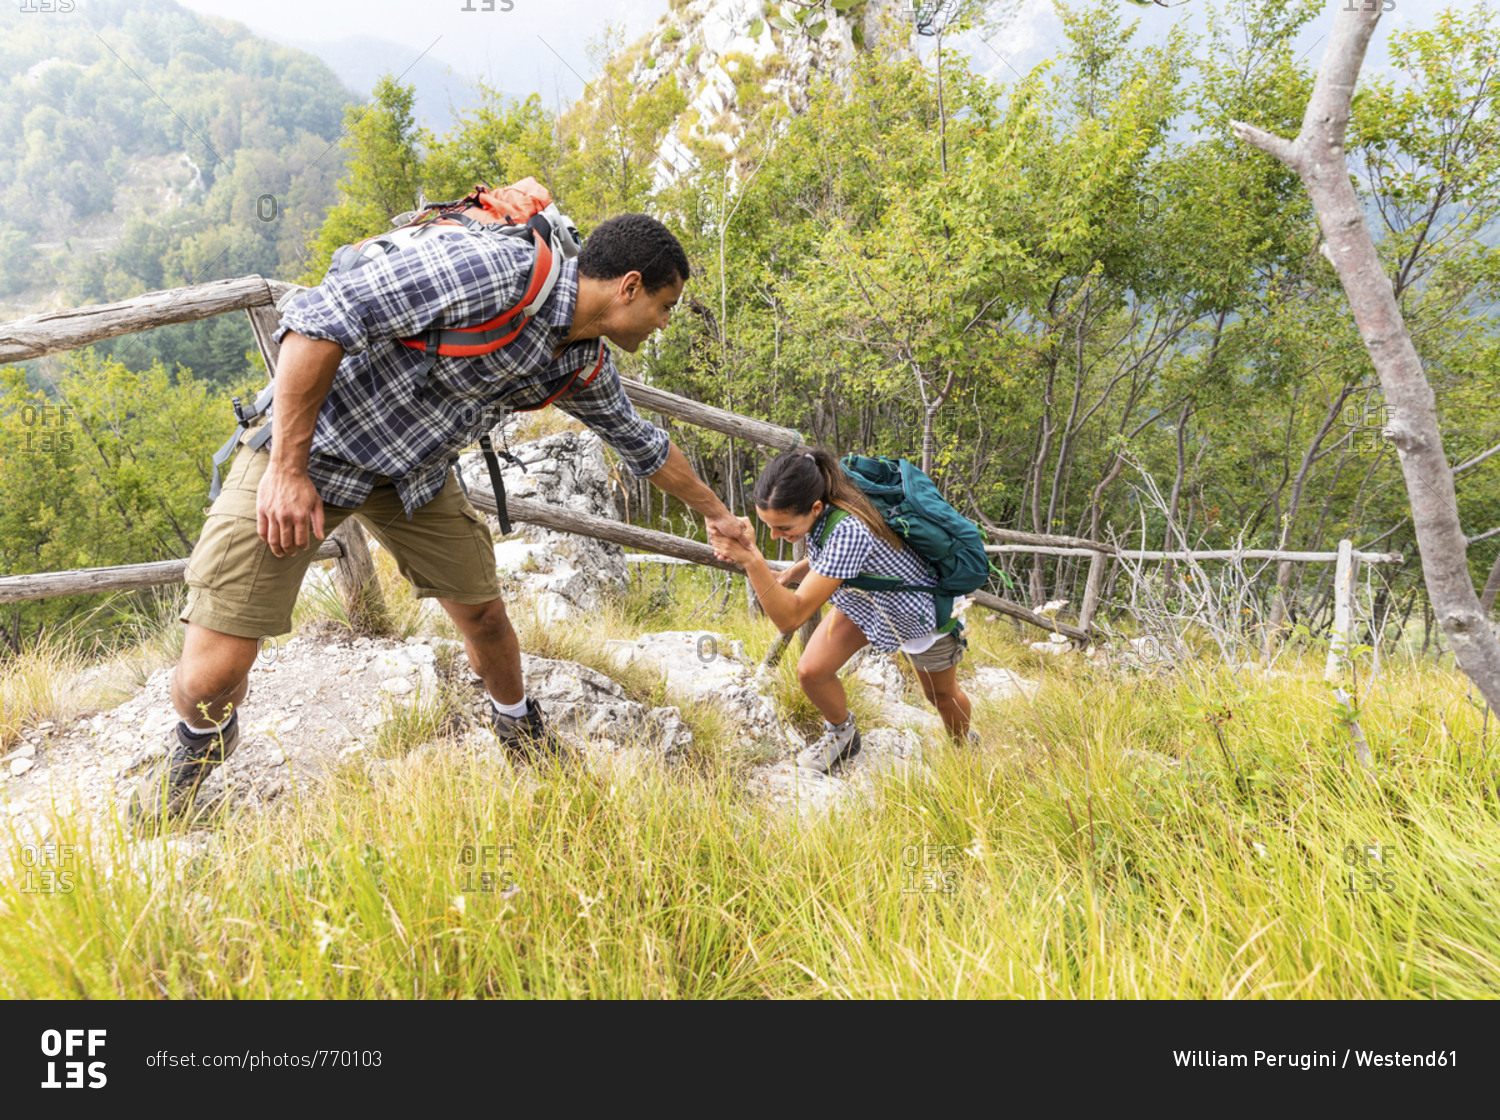 Italy- Massa- man helping a young woman to climb a step while hiking in the Alpi Apuane mountains